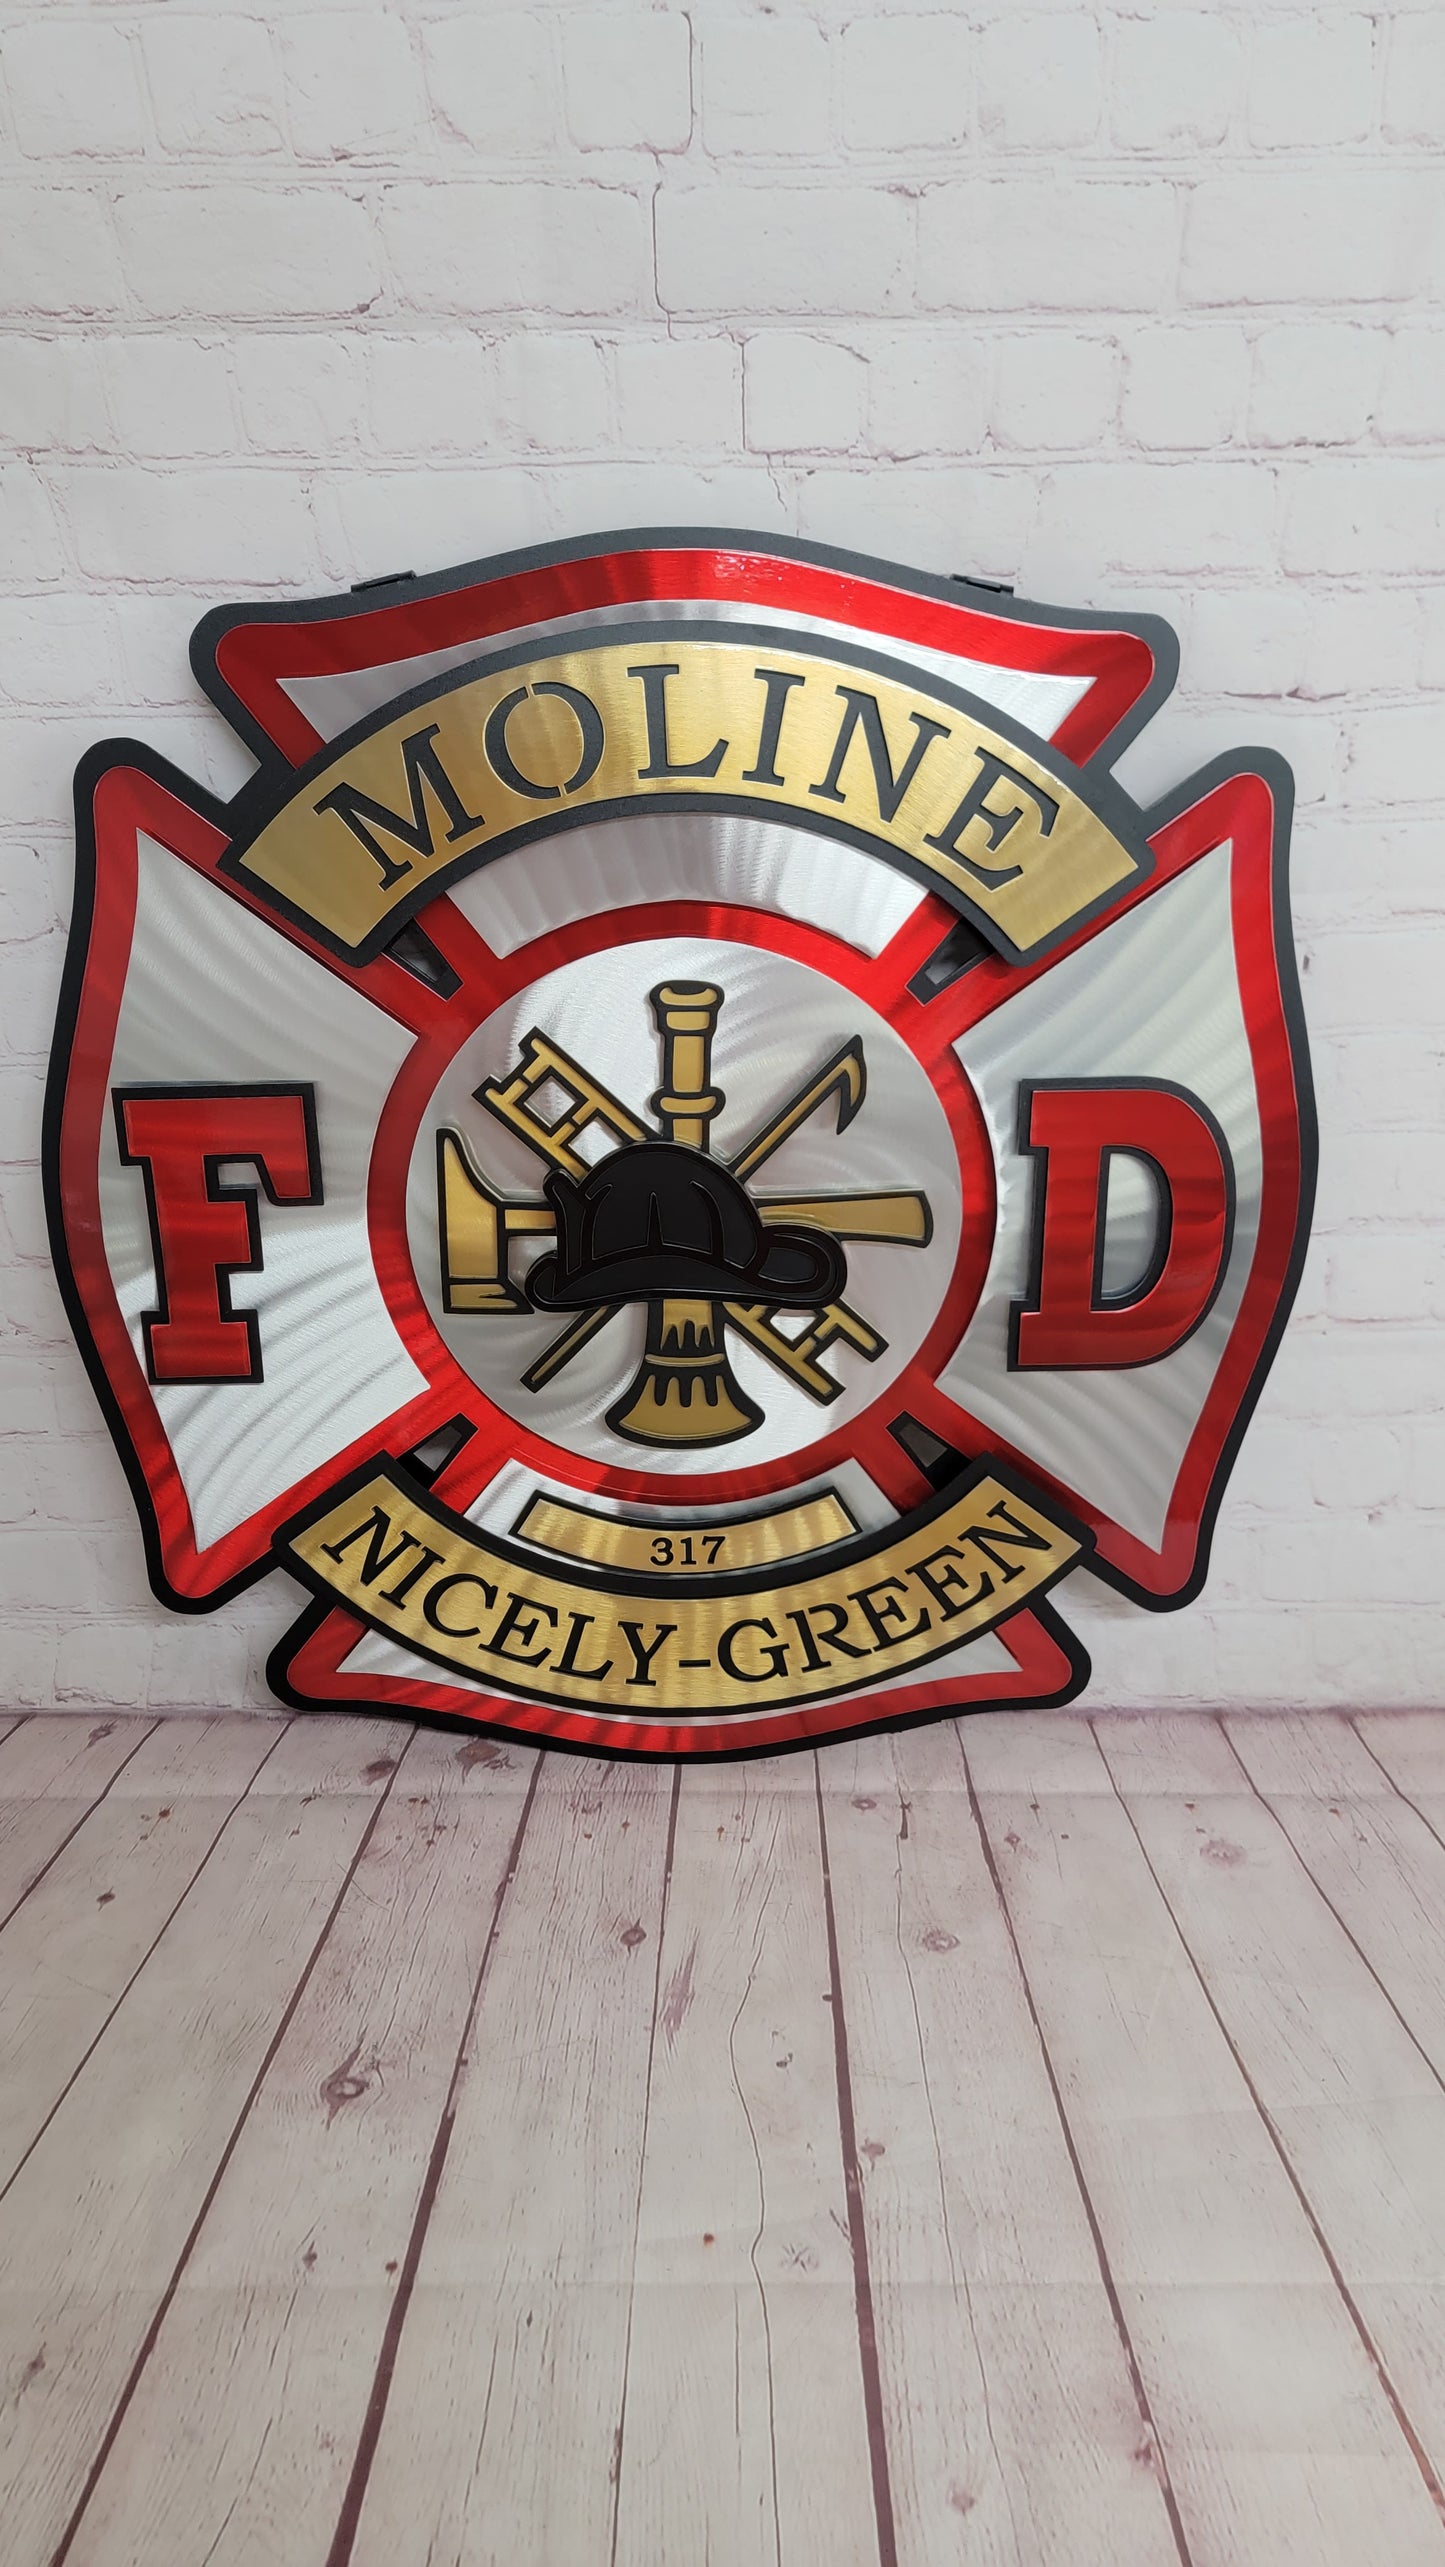 Moline Fire Department Nicely-Green